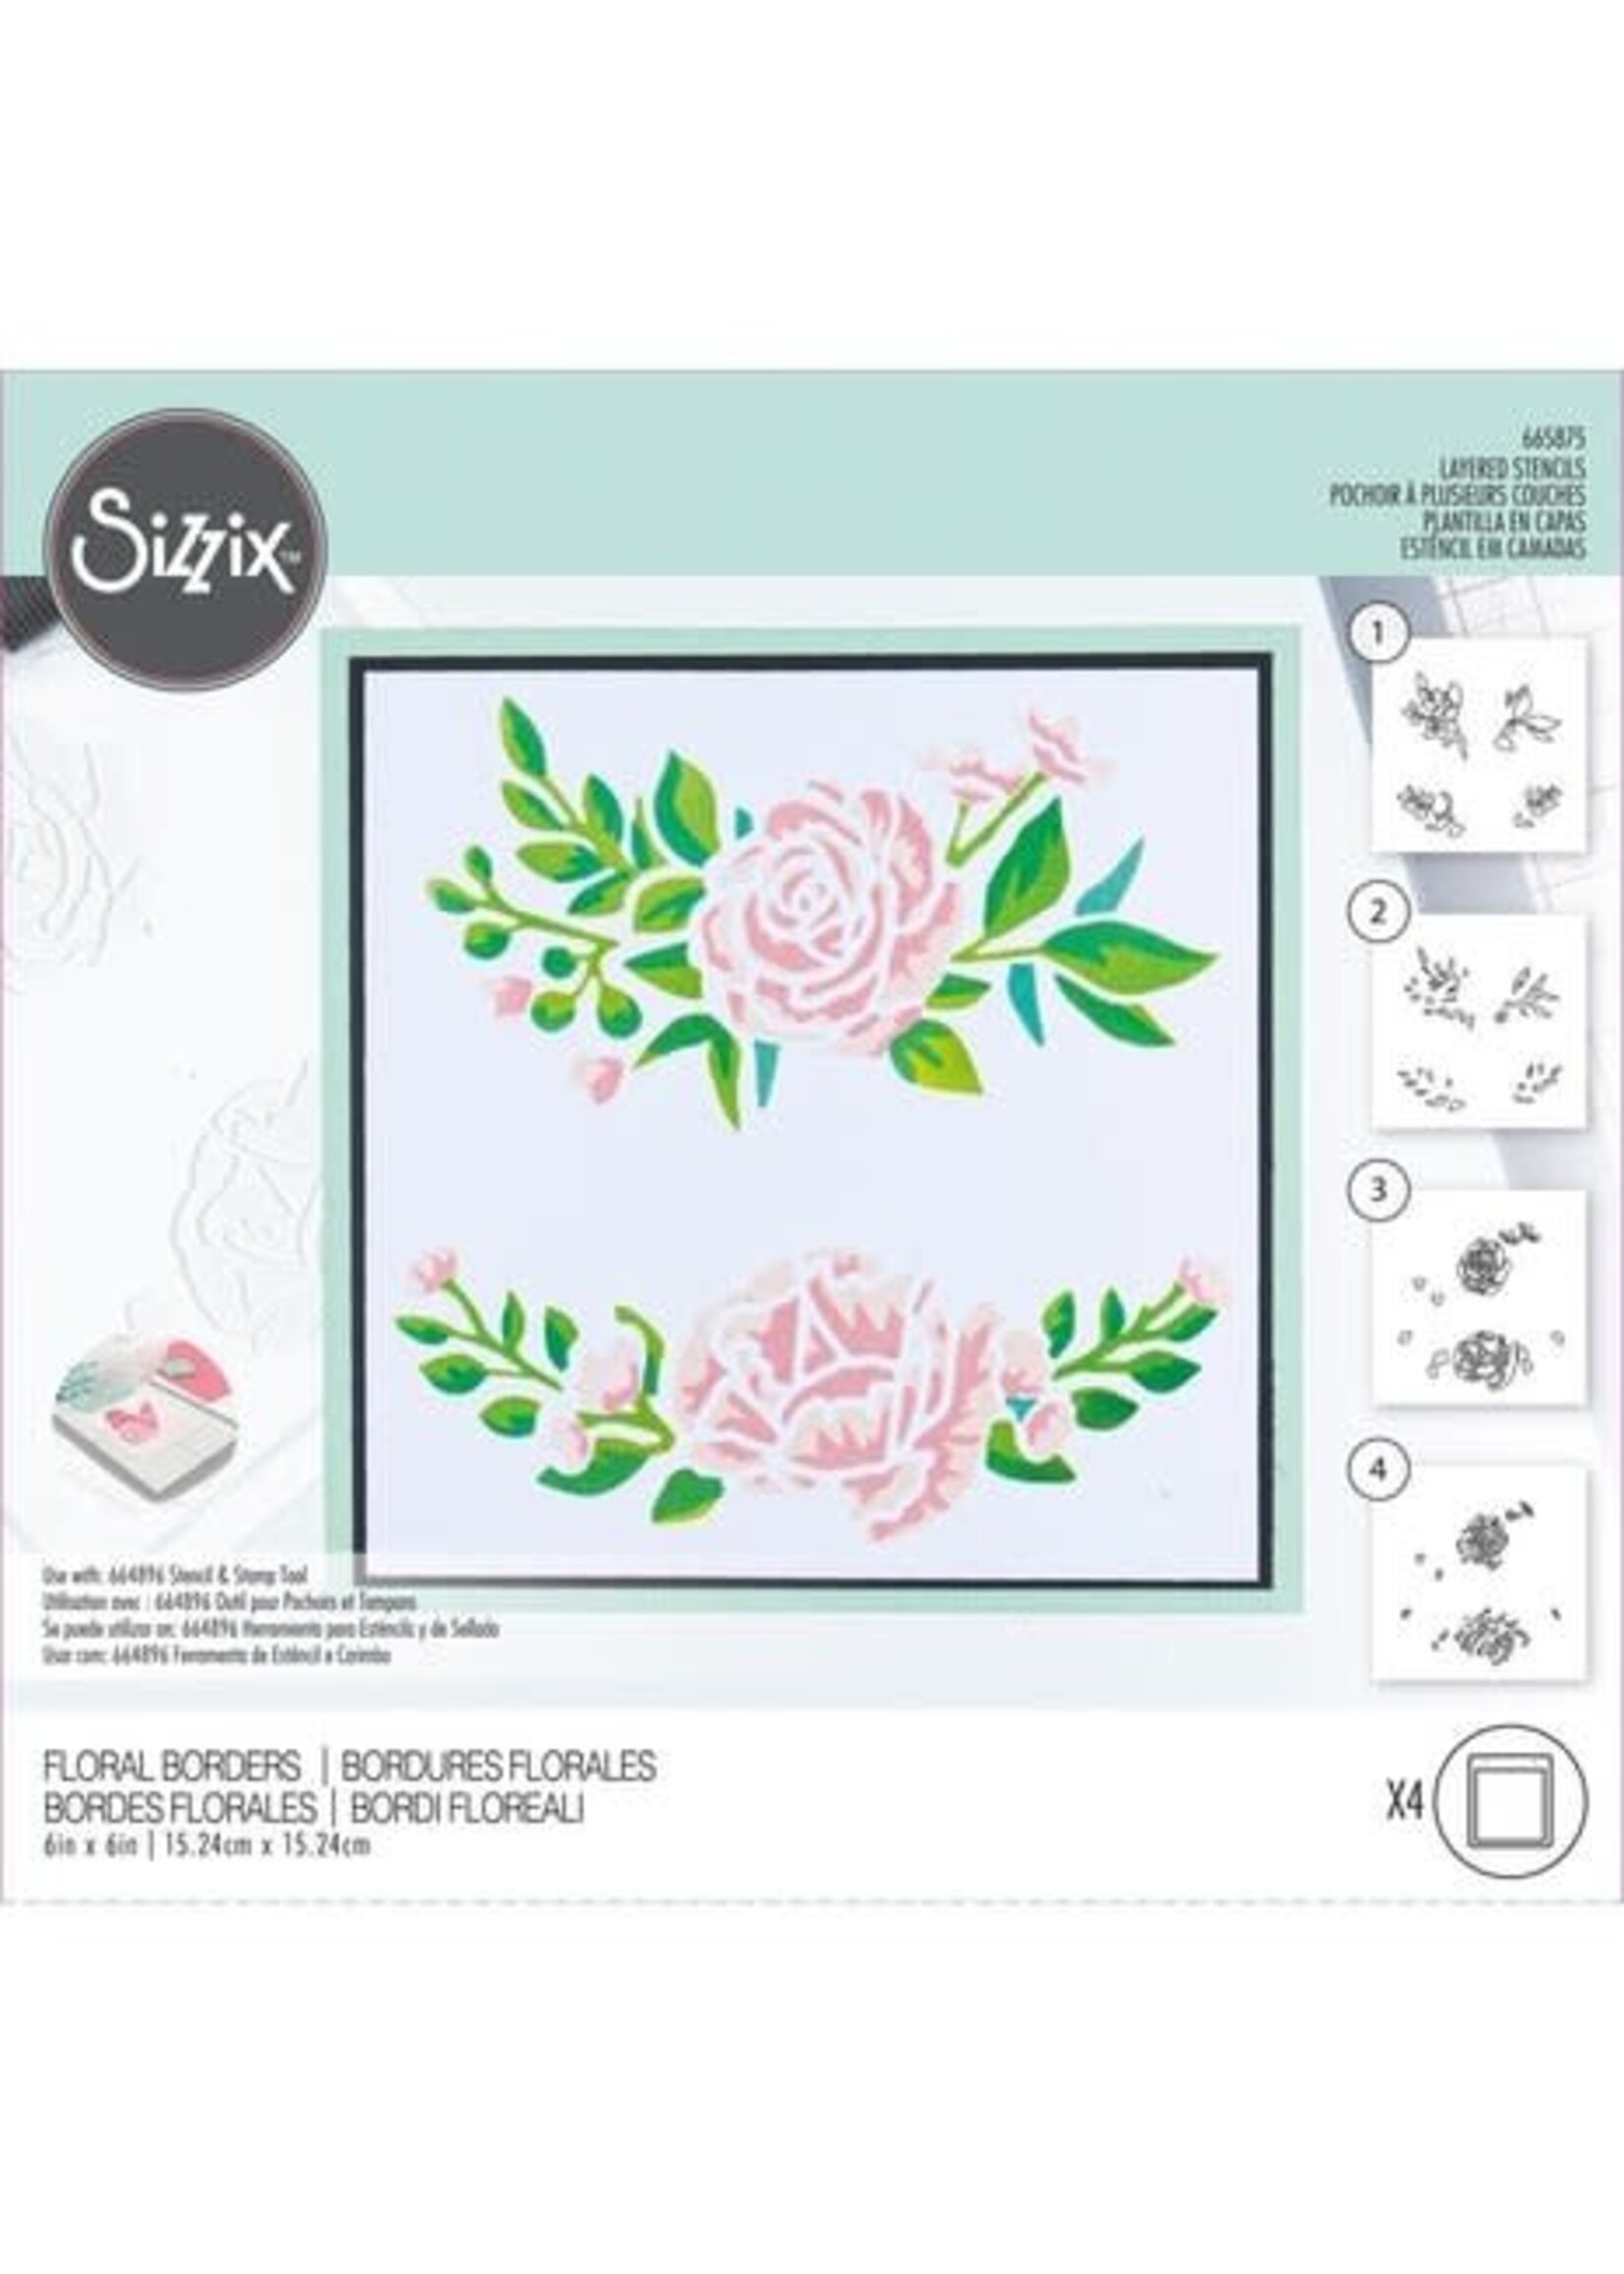 Sizzix Layered Stencils by Olivia Rose Floral Borders (4pcs) (665875)